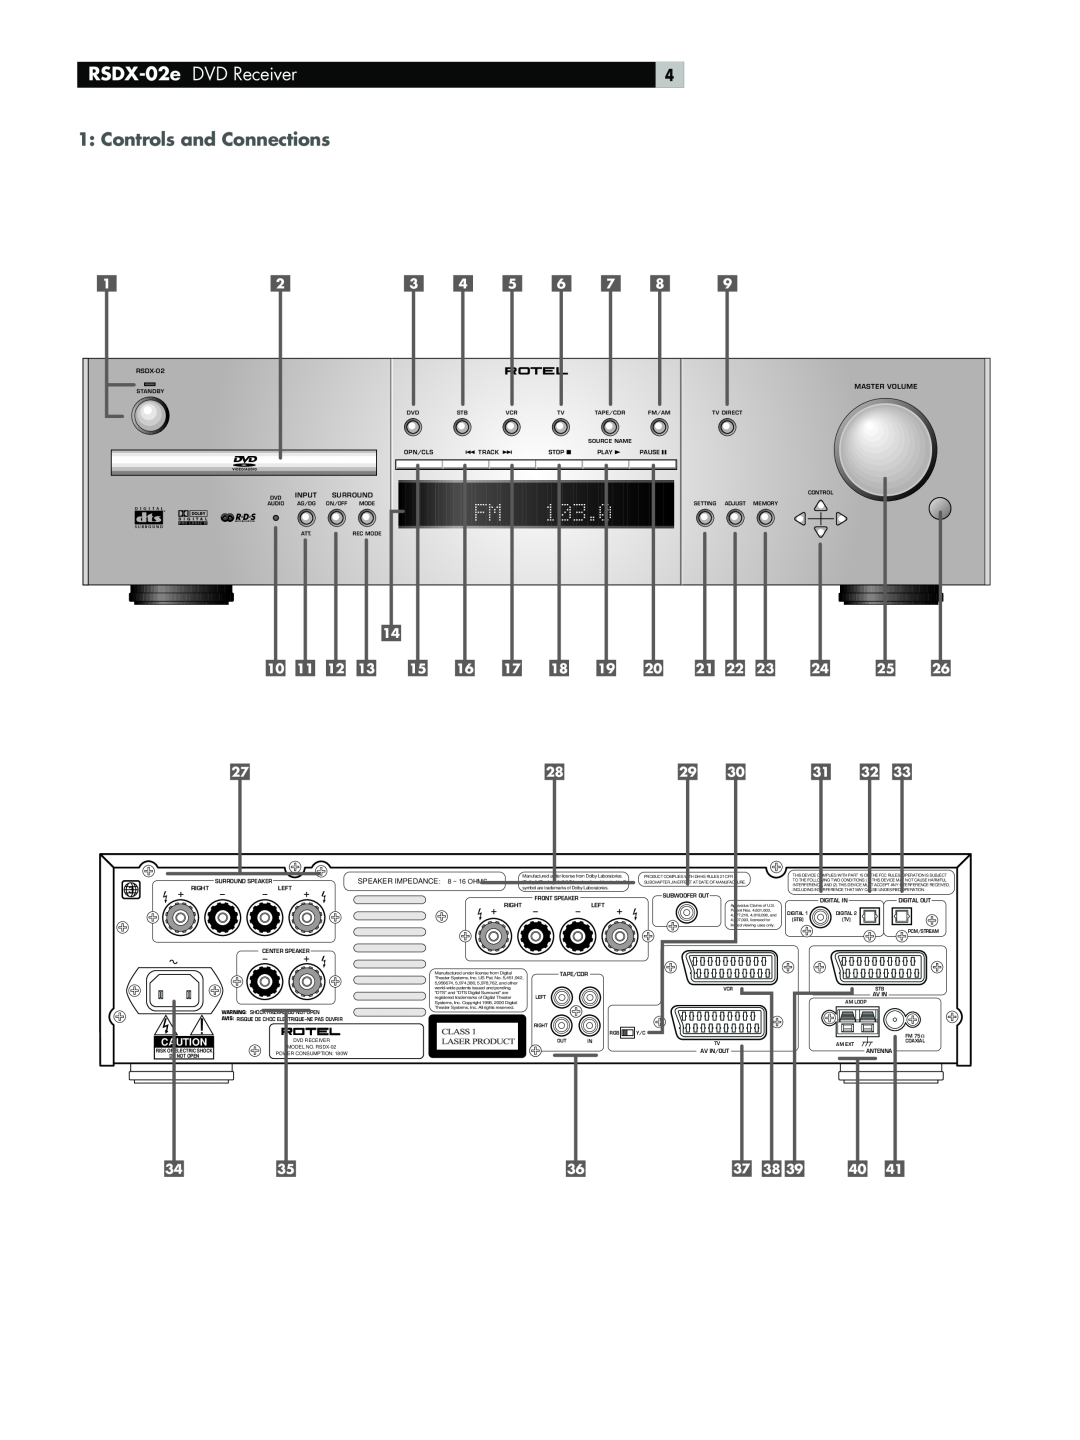 Rotel RSDX-02e DVD Receiver, Controls and Connections, Master Volume, Input, Surround, SPEAKER IMPEDANCE 8 ~ 16 OHMS 